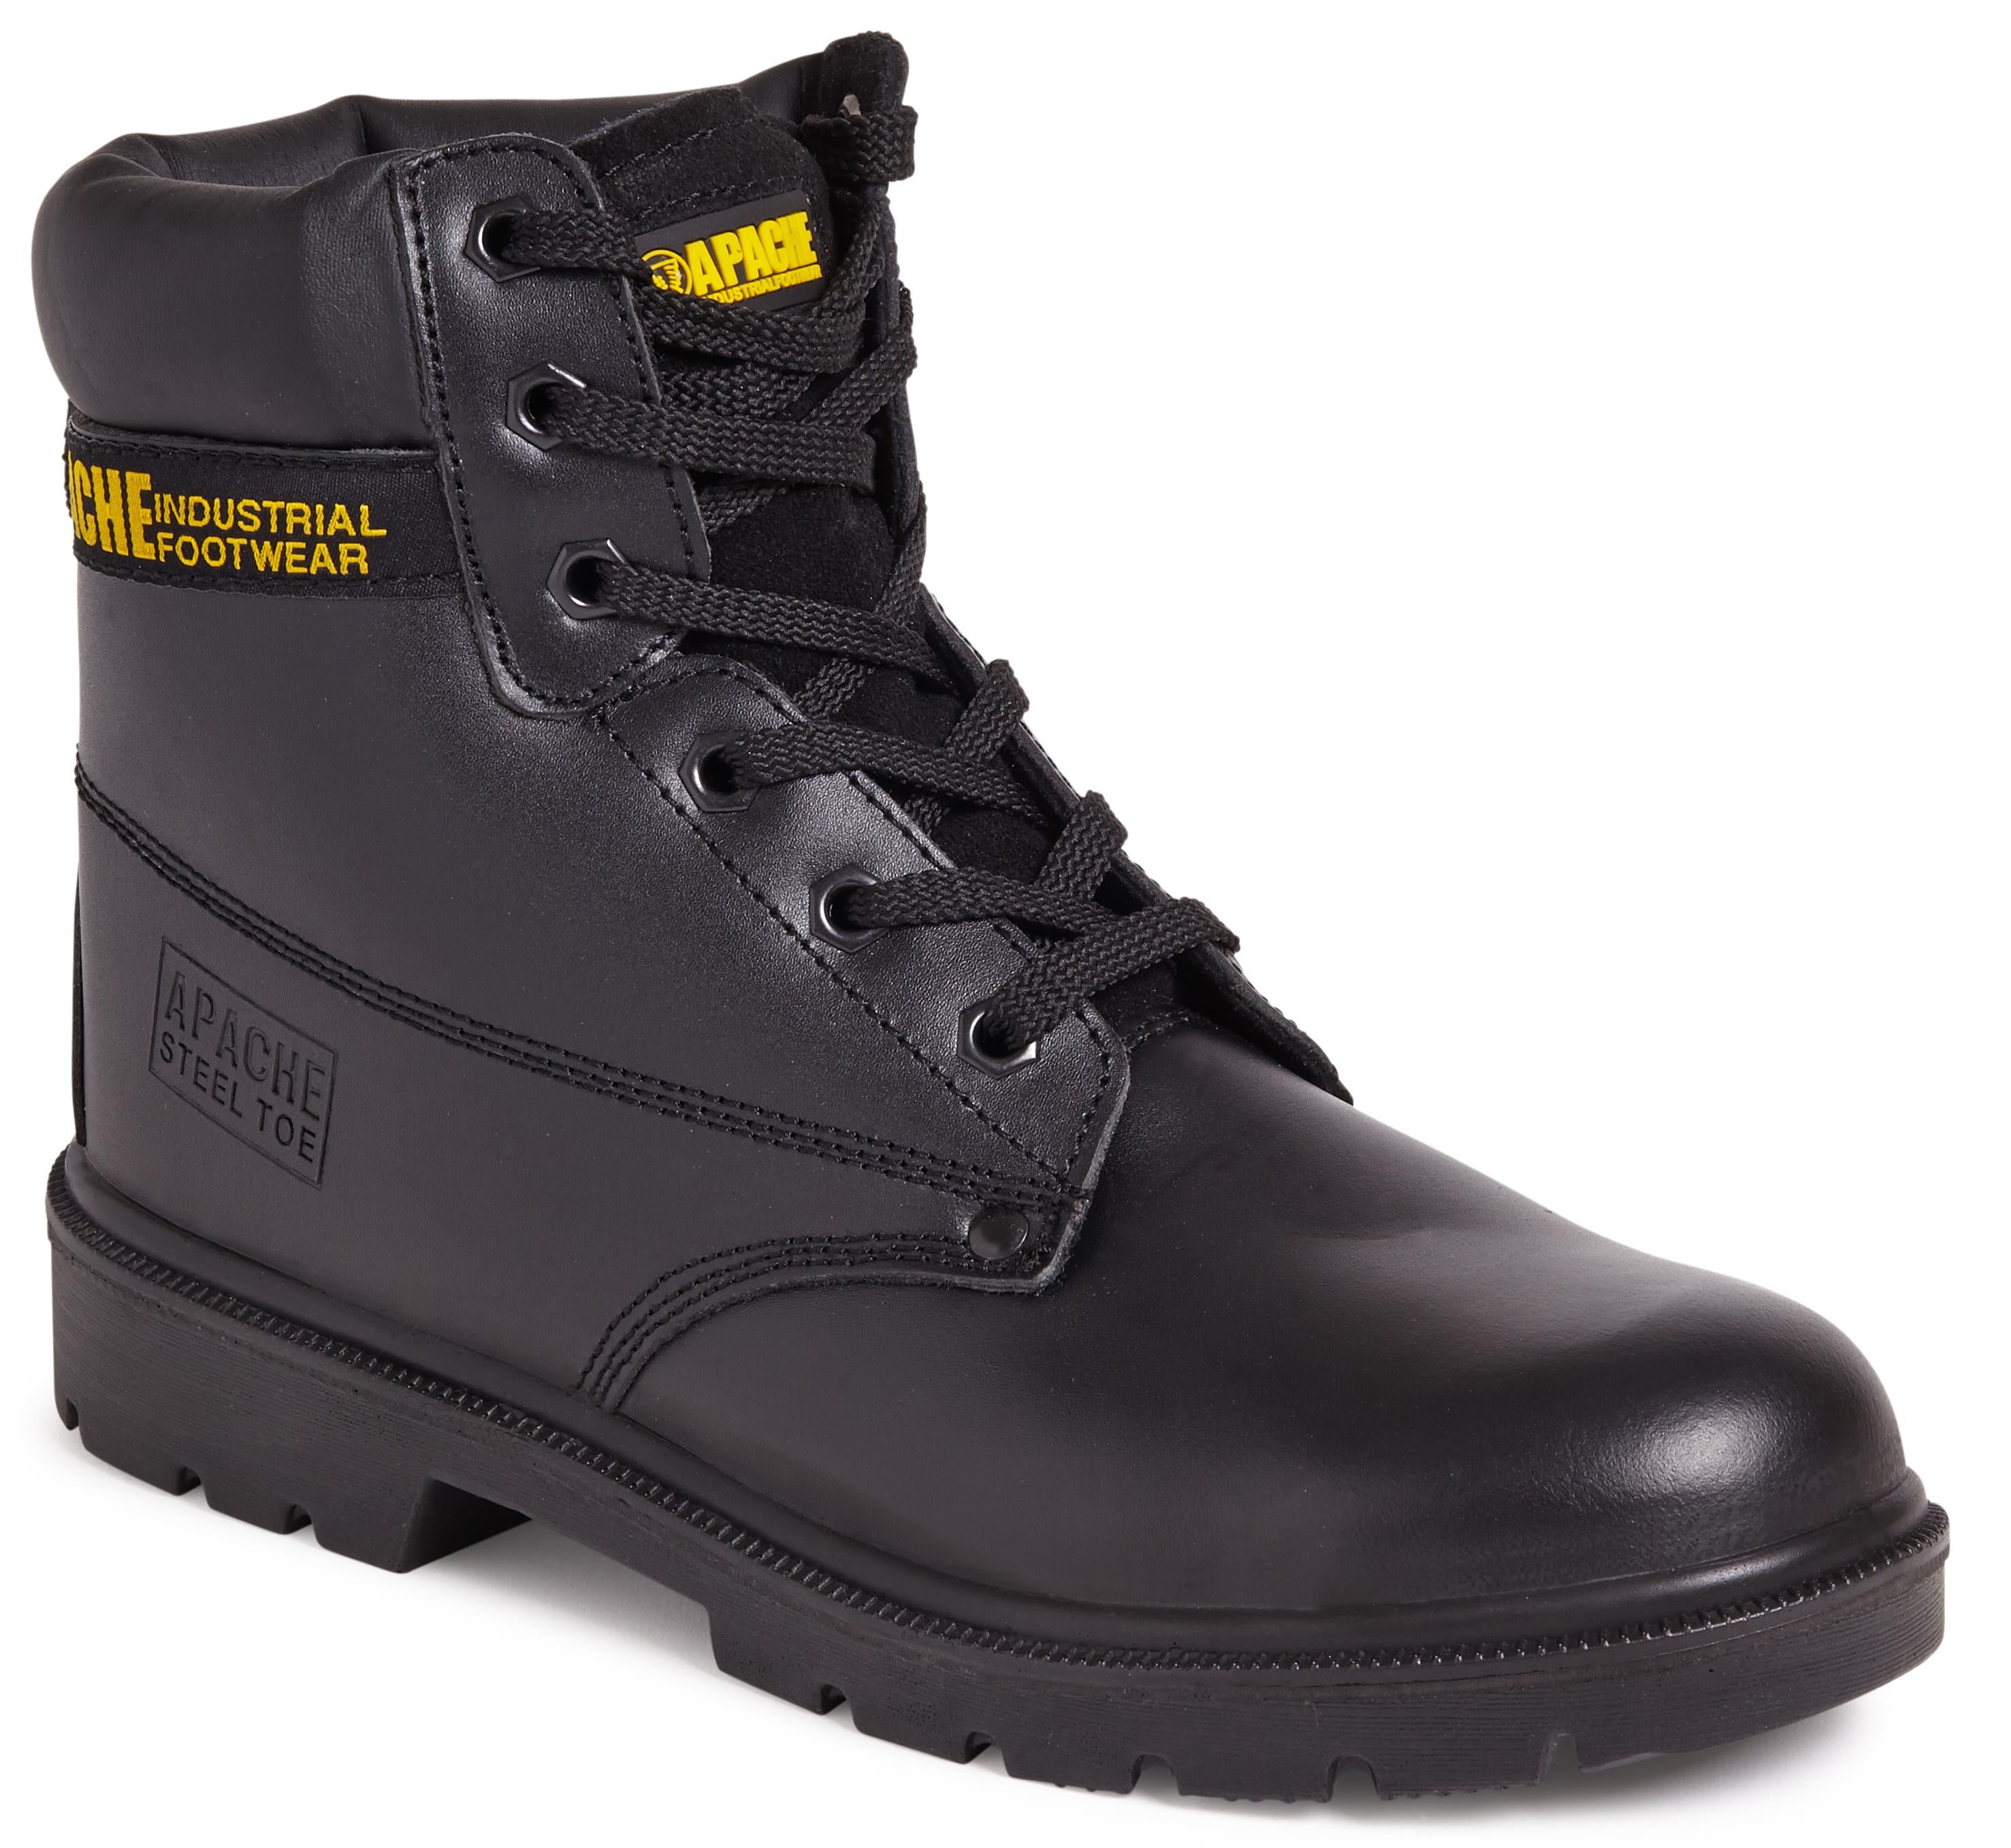 Apache AP300 black S3 weather resistant leather steel toe safety boot with midsole